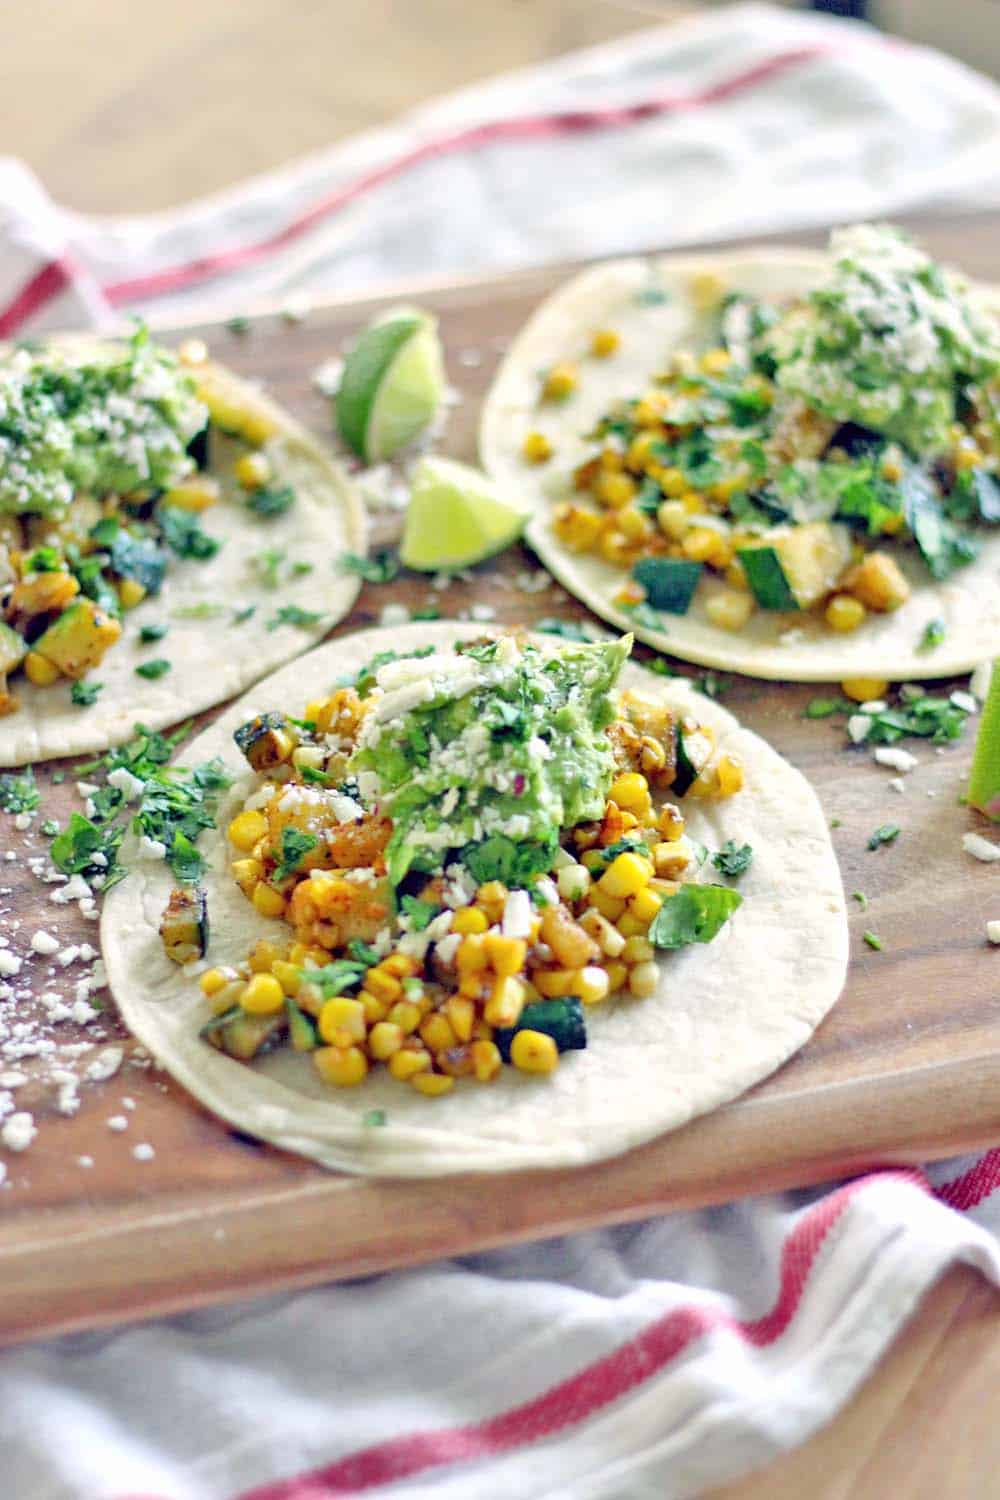 These zucchini and corn tacos with fresh guacamole are simple and healthy, have a bit of a kick, and take only ten minutes to make!